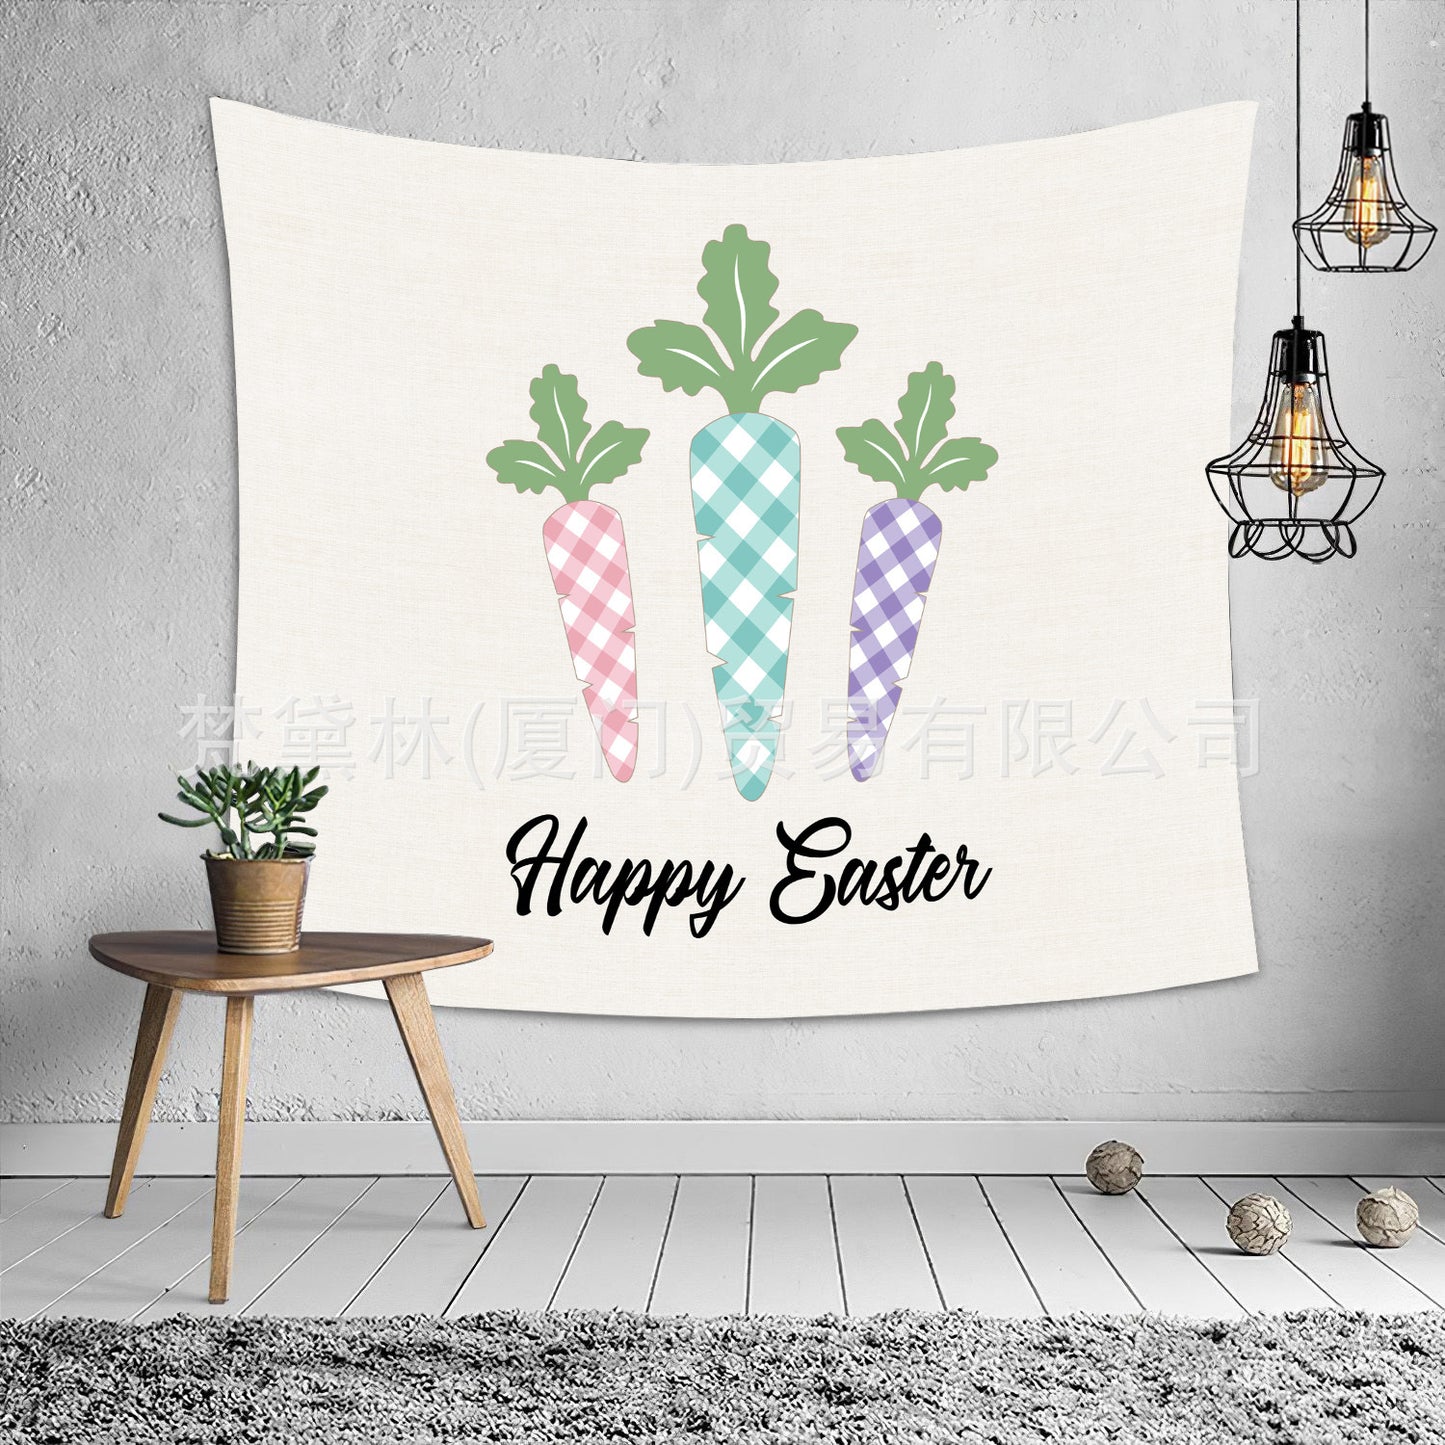 Happy Easter Day Room Wall Tapestry for Decoration